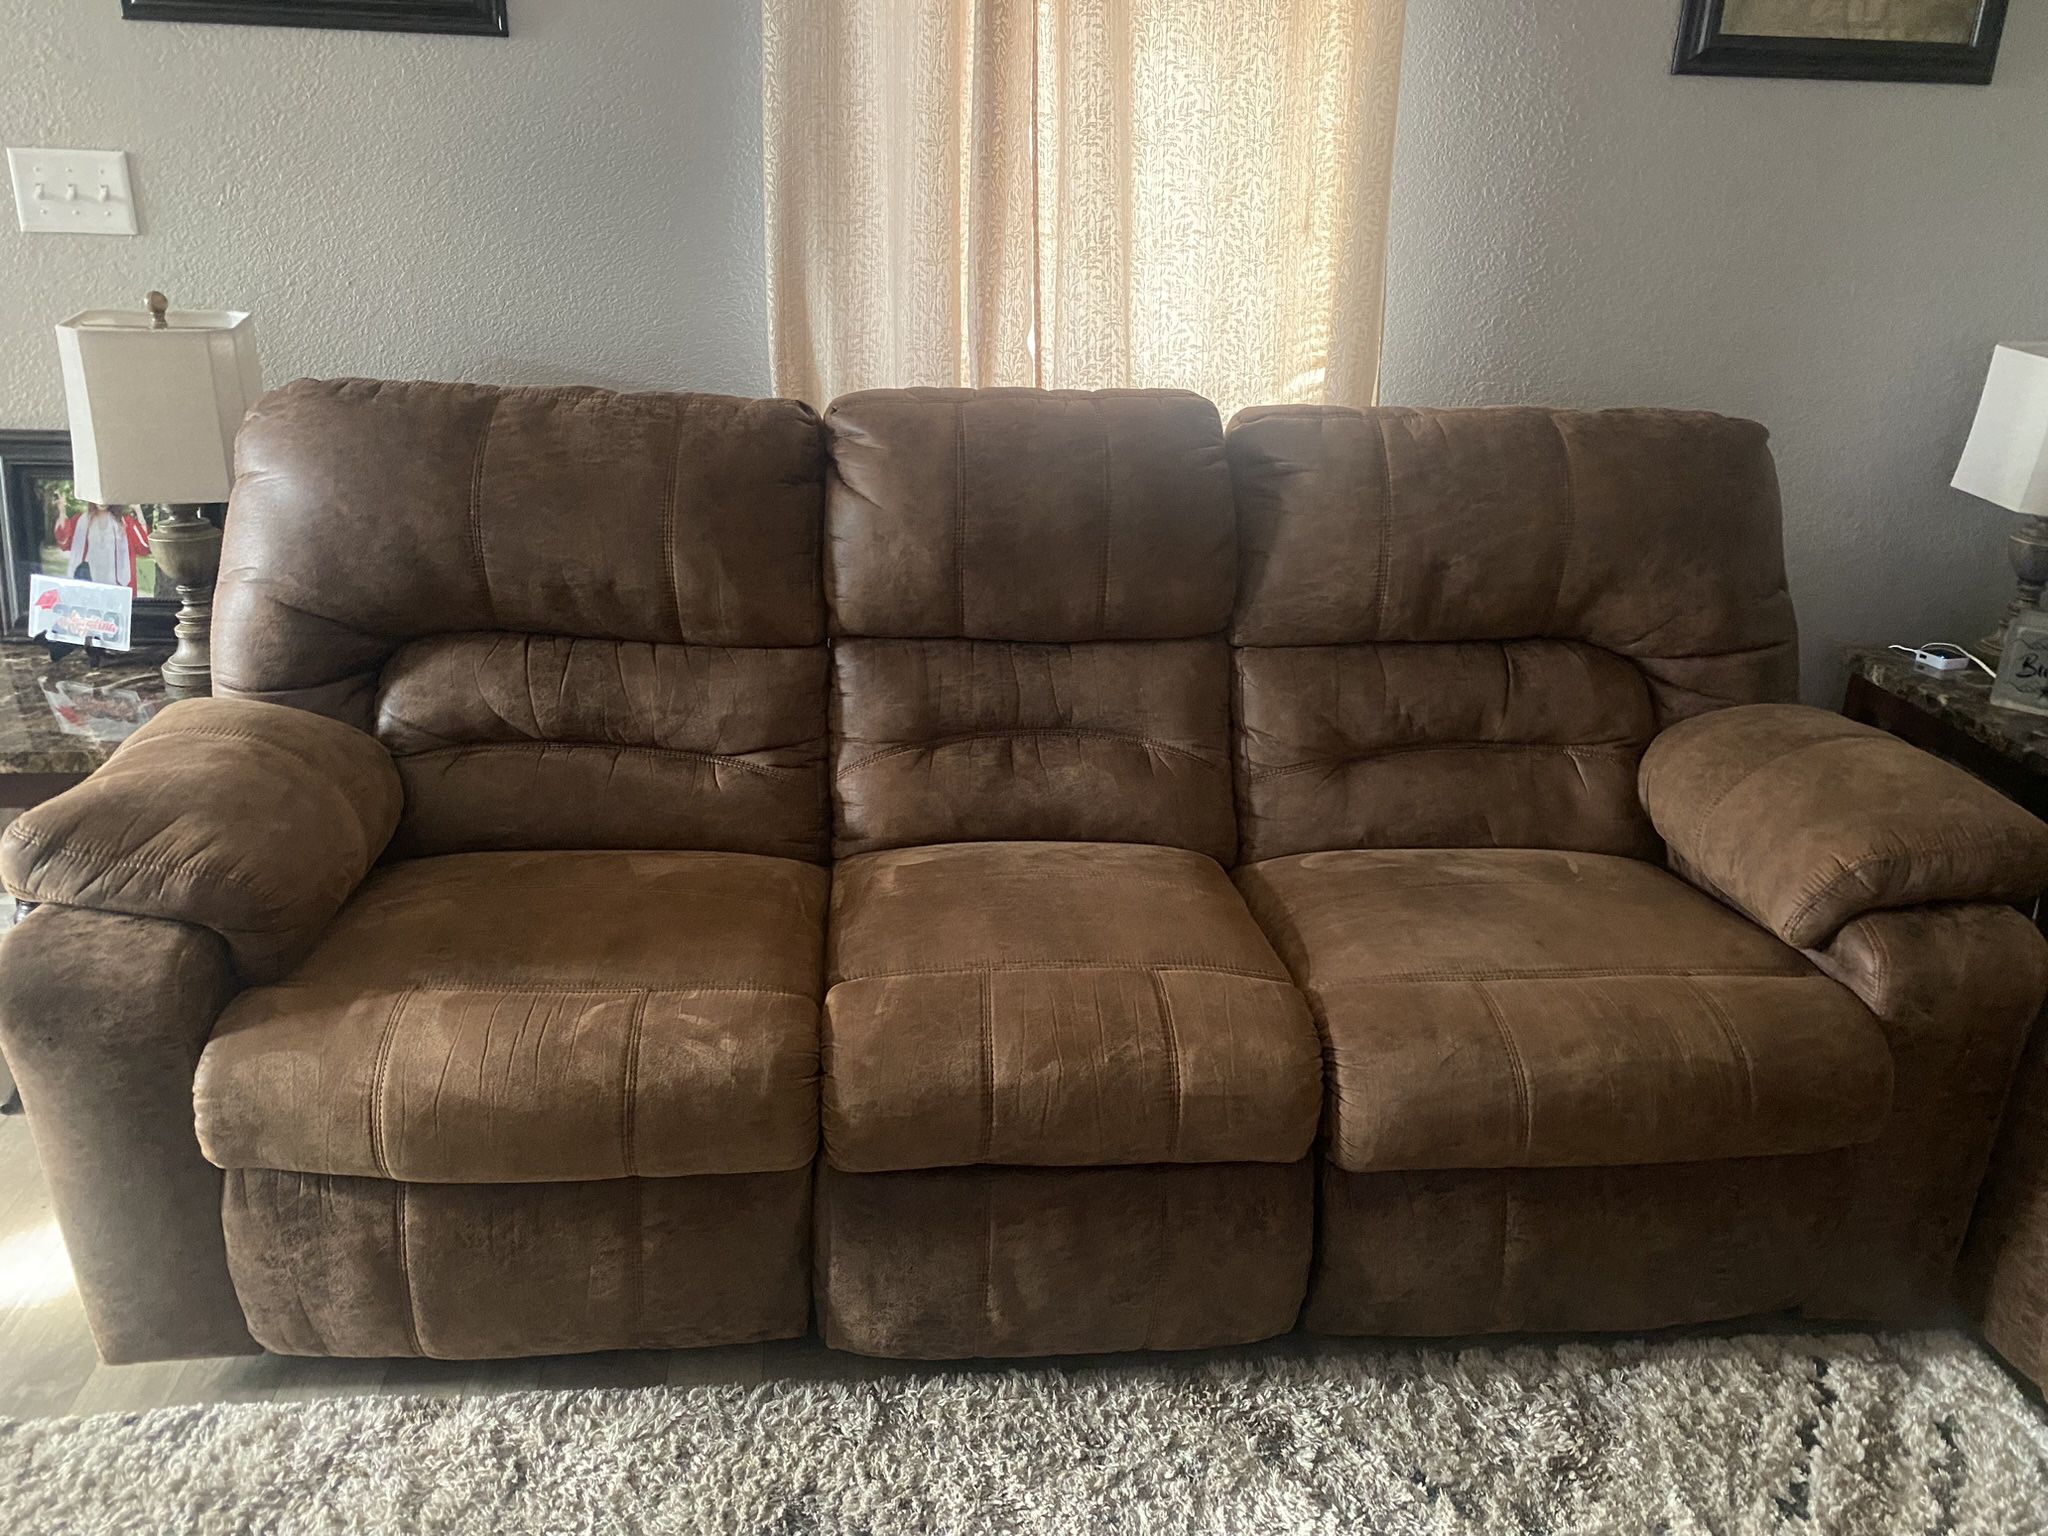 Brown couches